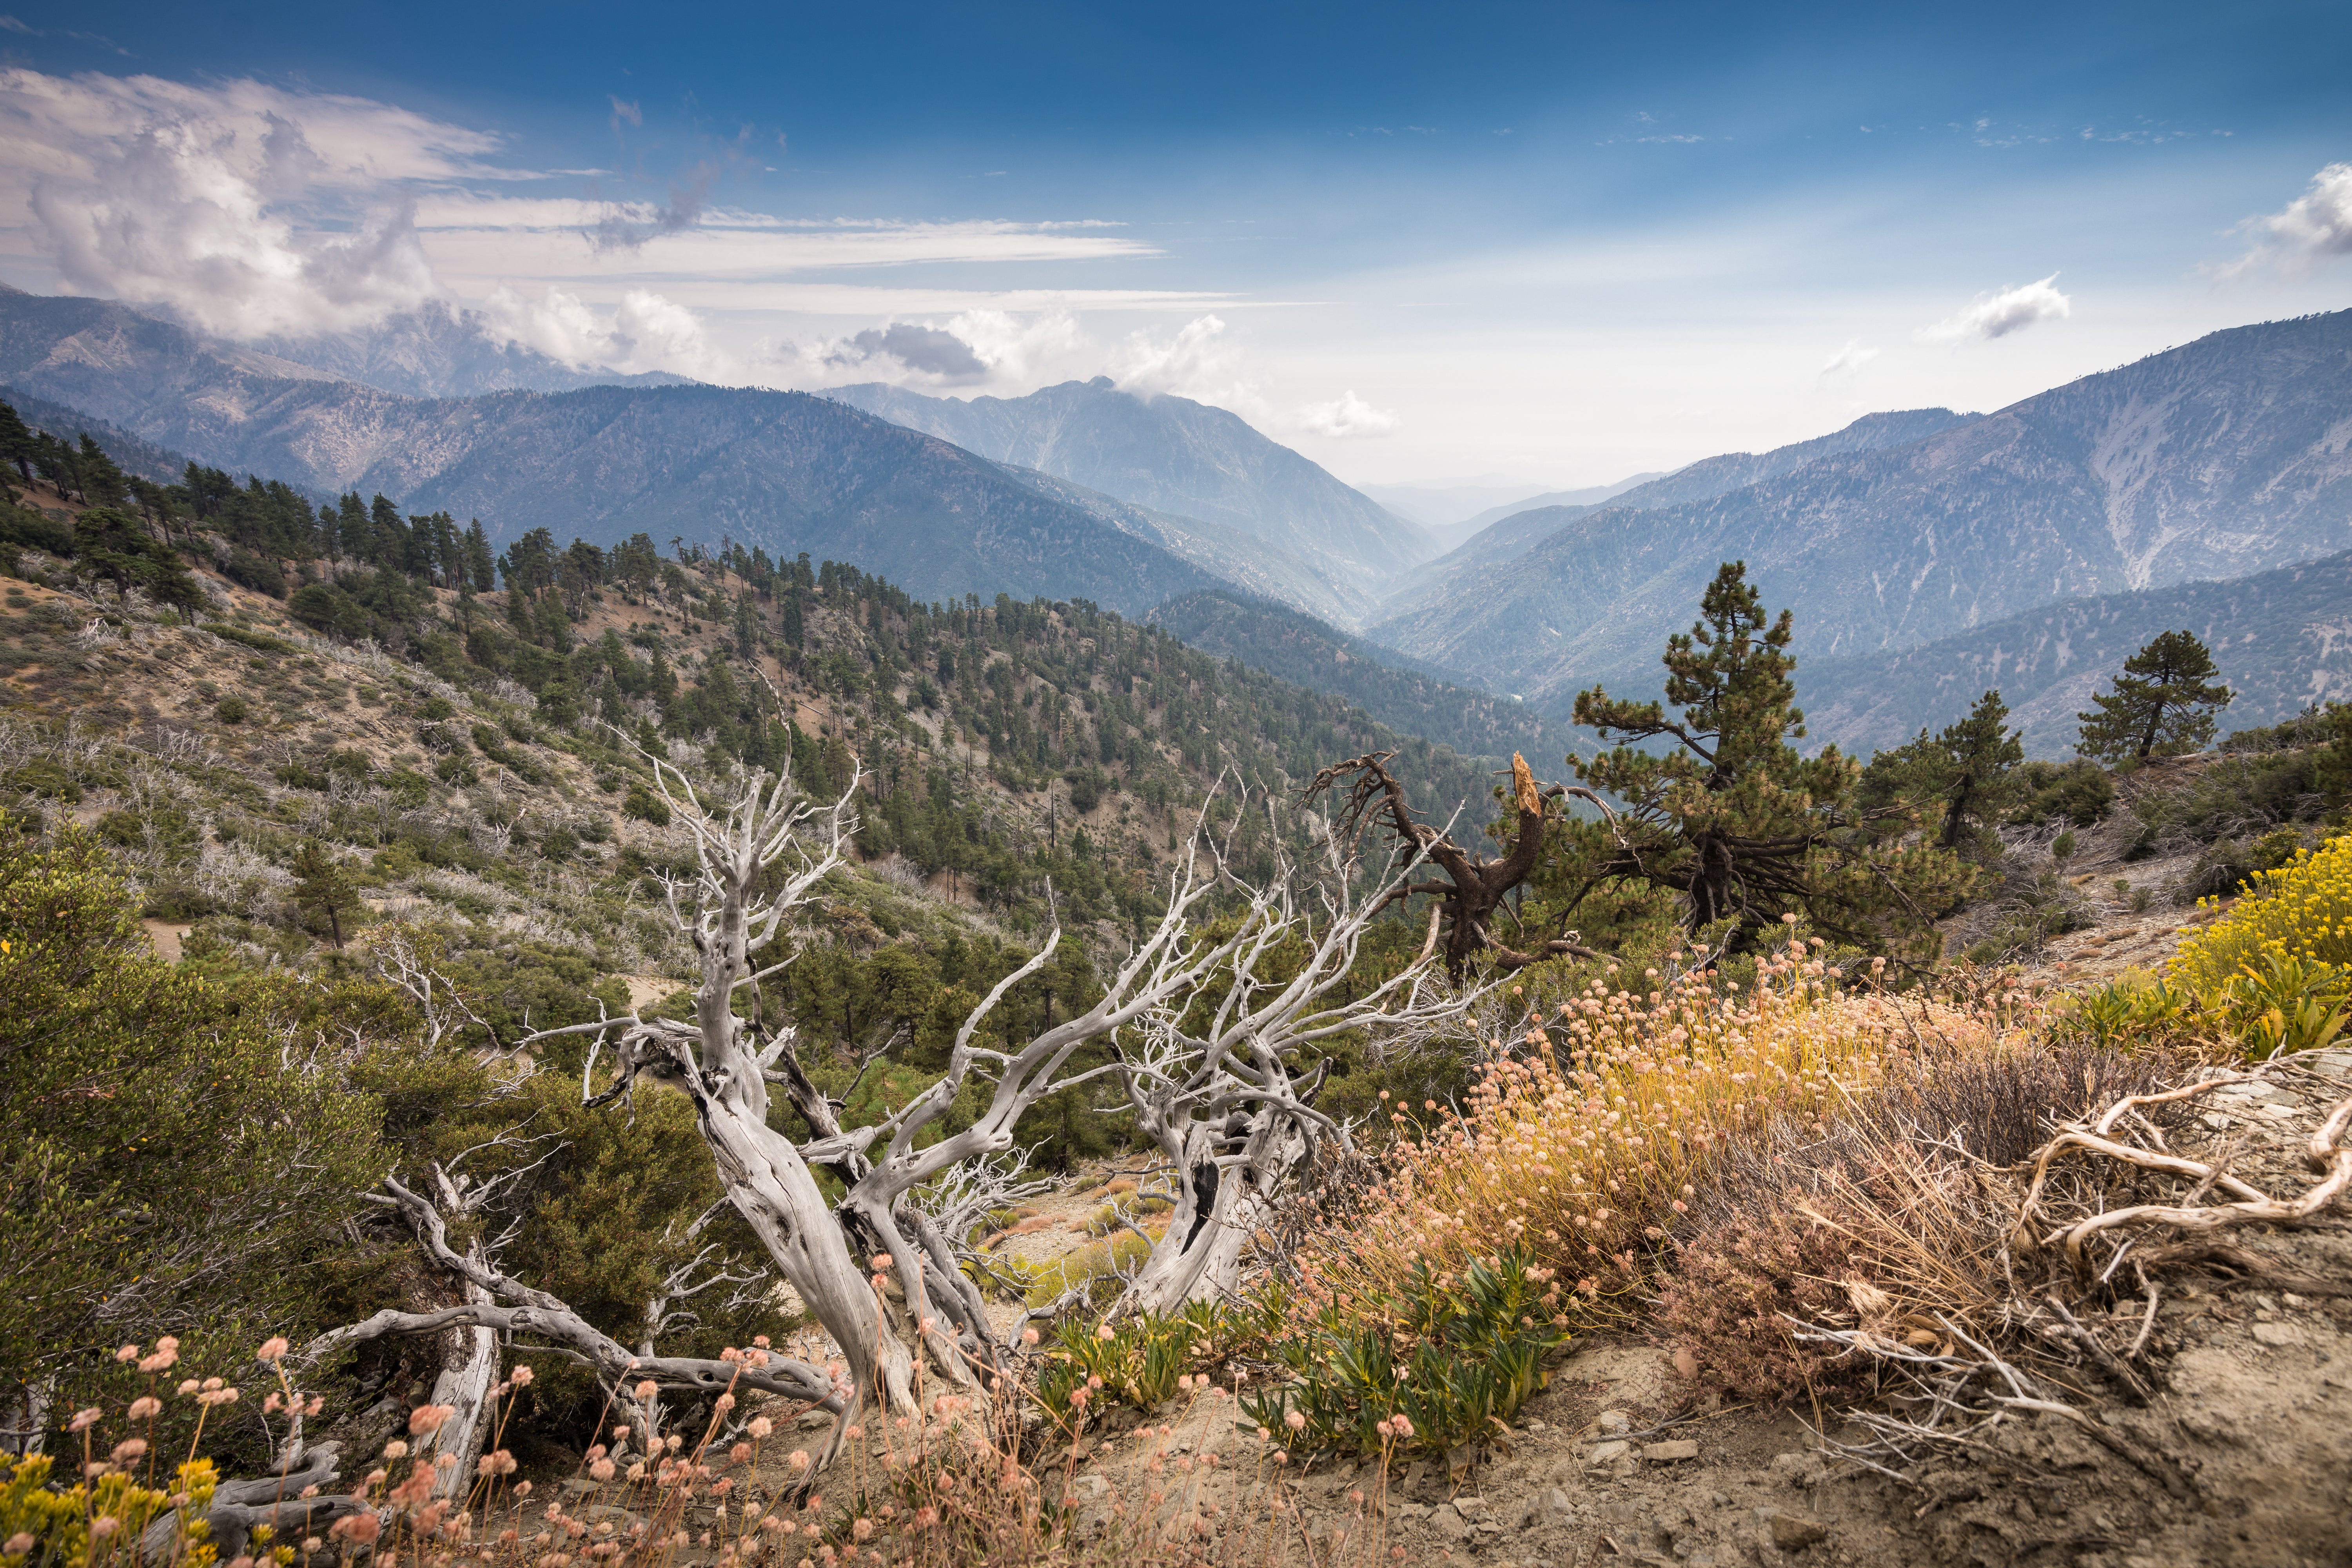 A view from Inspiration Point along the Pacific Crest Trail near the town of Wrightwood in Southern California. The view overlooks the Angeles National Forest and San Gabriel Mountains and river basin. Shot in Summer of 2017 with an ultra wide-angle lens.